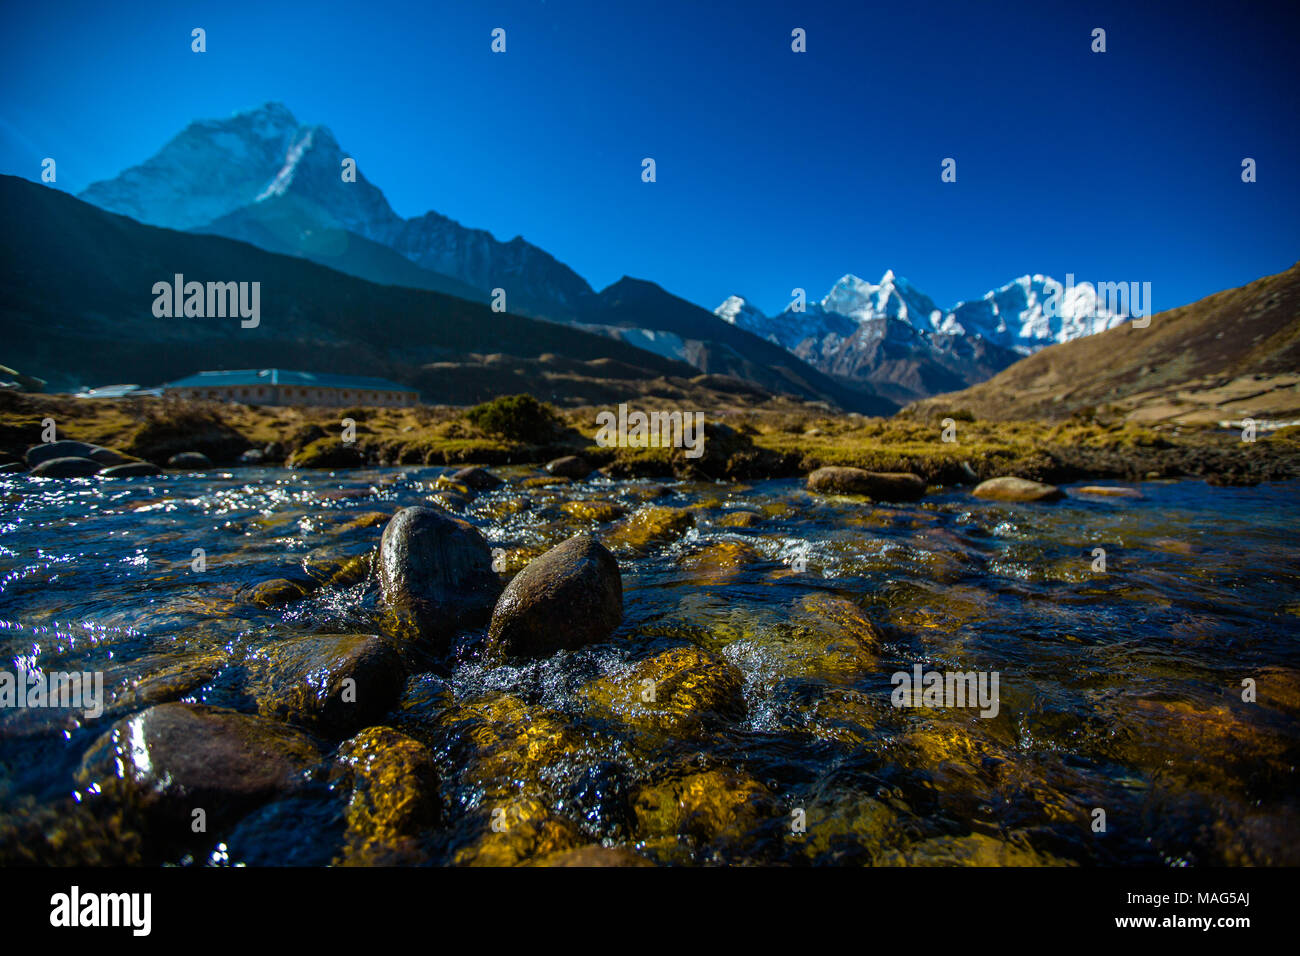 A tranquil stream of water passes down the valley towards Ama Dablam in the Himalayas, Pheriche, Nepal Stock Photo